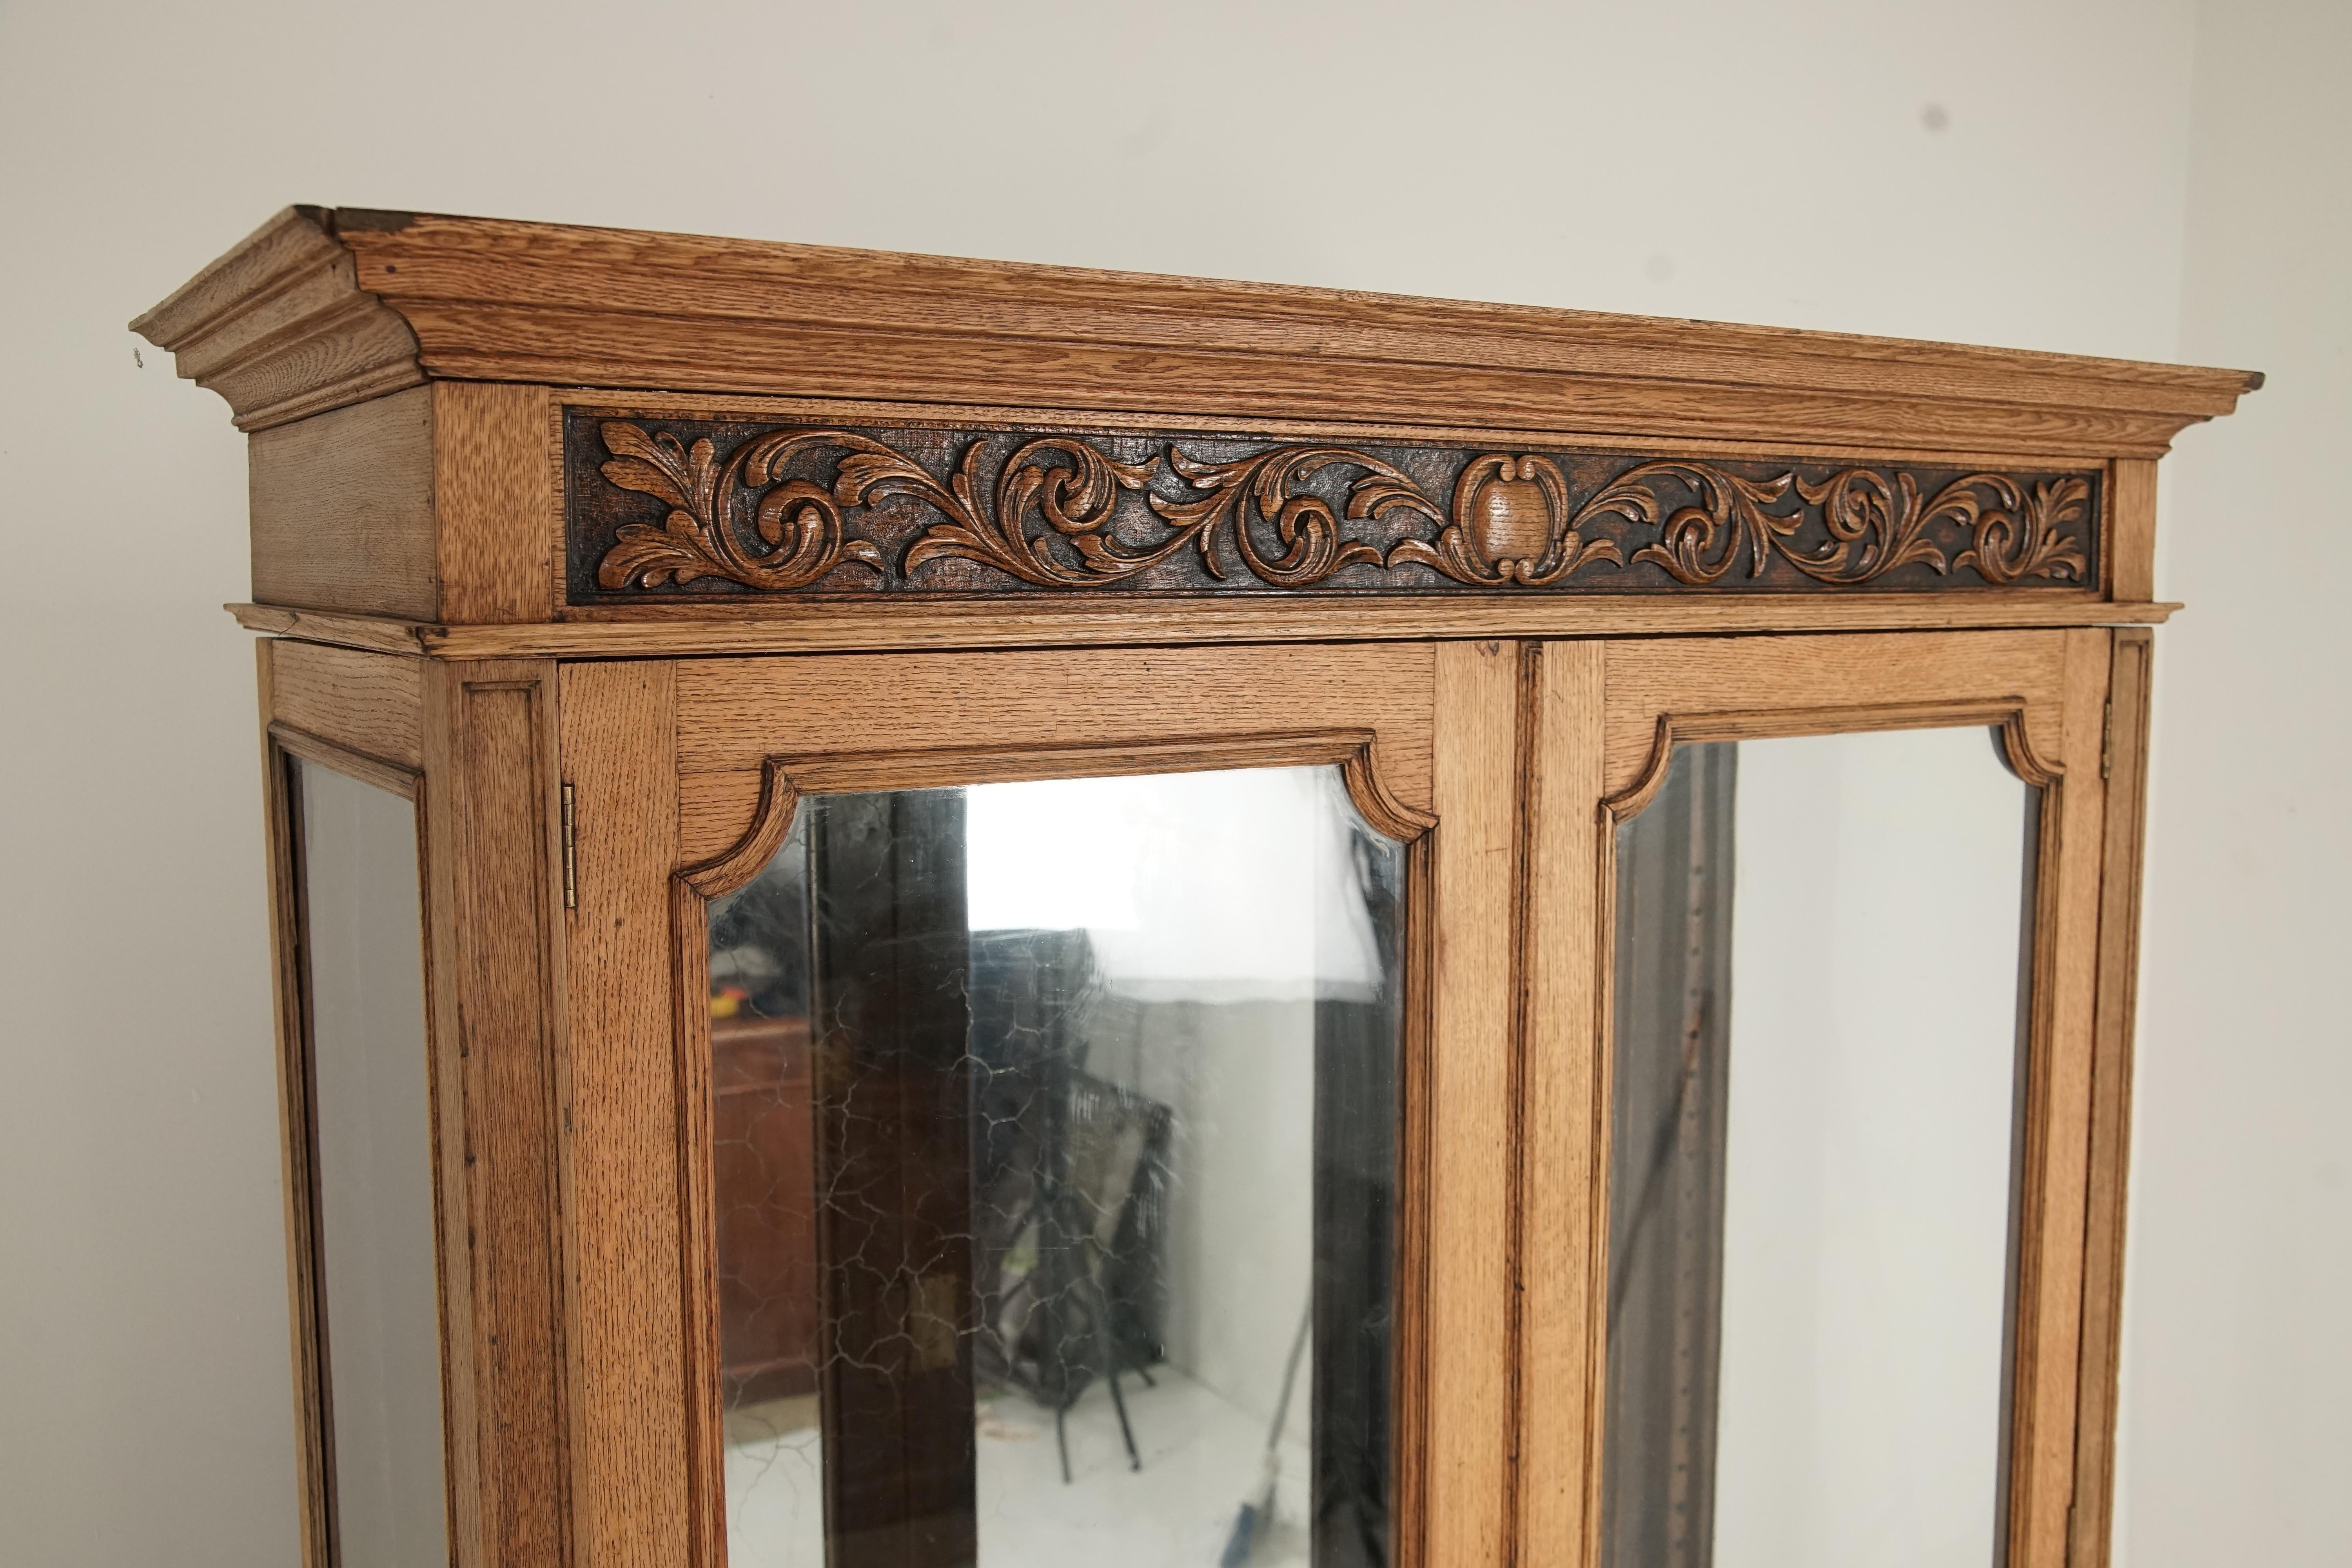 Large antique Victorian carved oak 2 door display China cabinet, Scotland 1890, H178

Scotland 1890
Solid oak
Original finish
Carved oak cornice on top
Pair of original oak glass doors below
Opens to reveal glass sides and crackling mirror on the